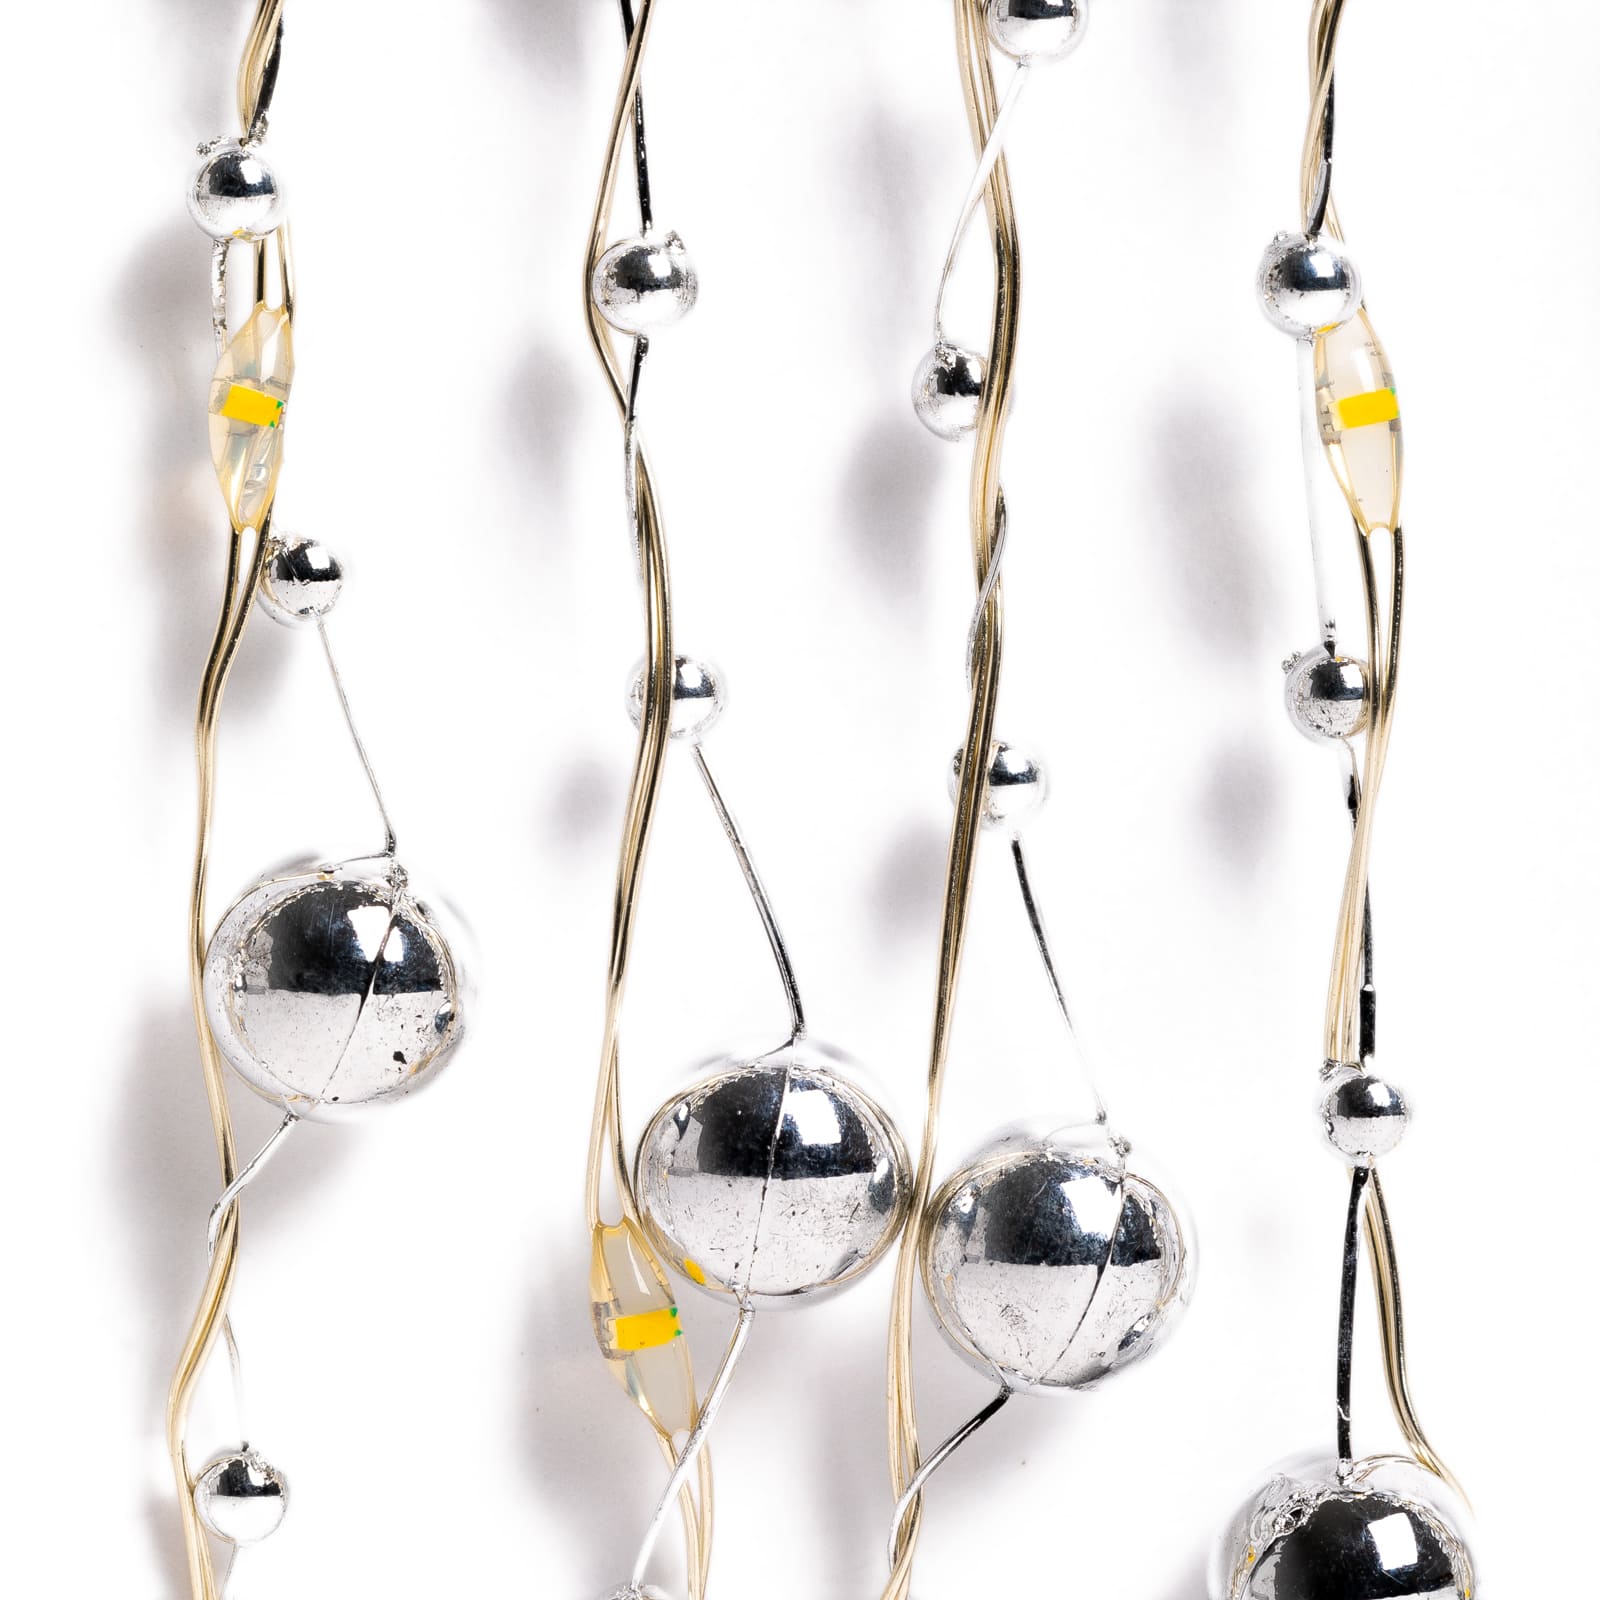 12 Pack: 40ct. Warm White Silver Pearl LED String Lights by Ashland&#xAE;